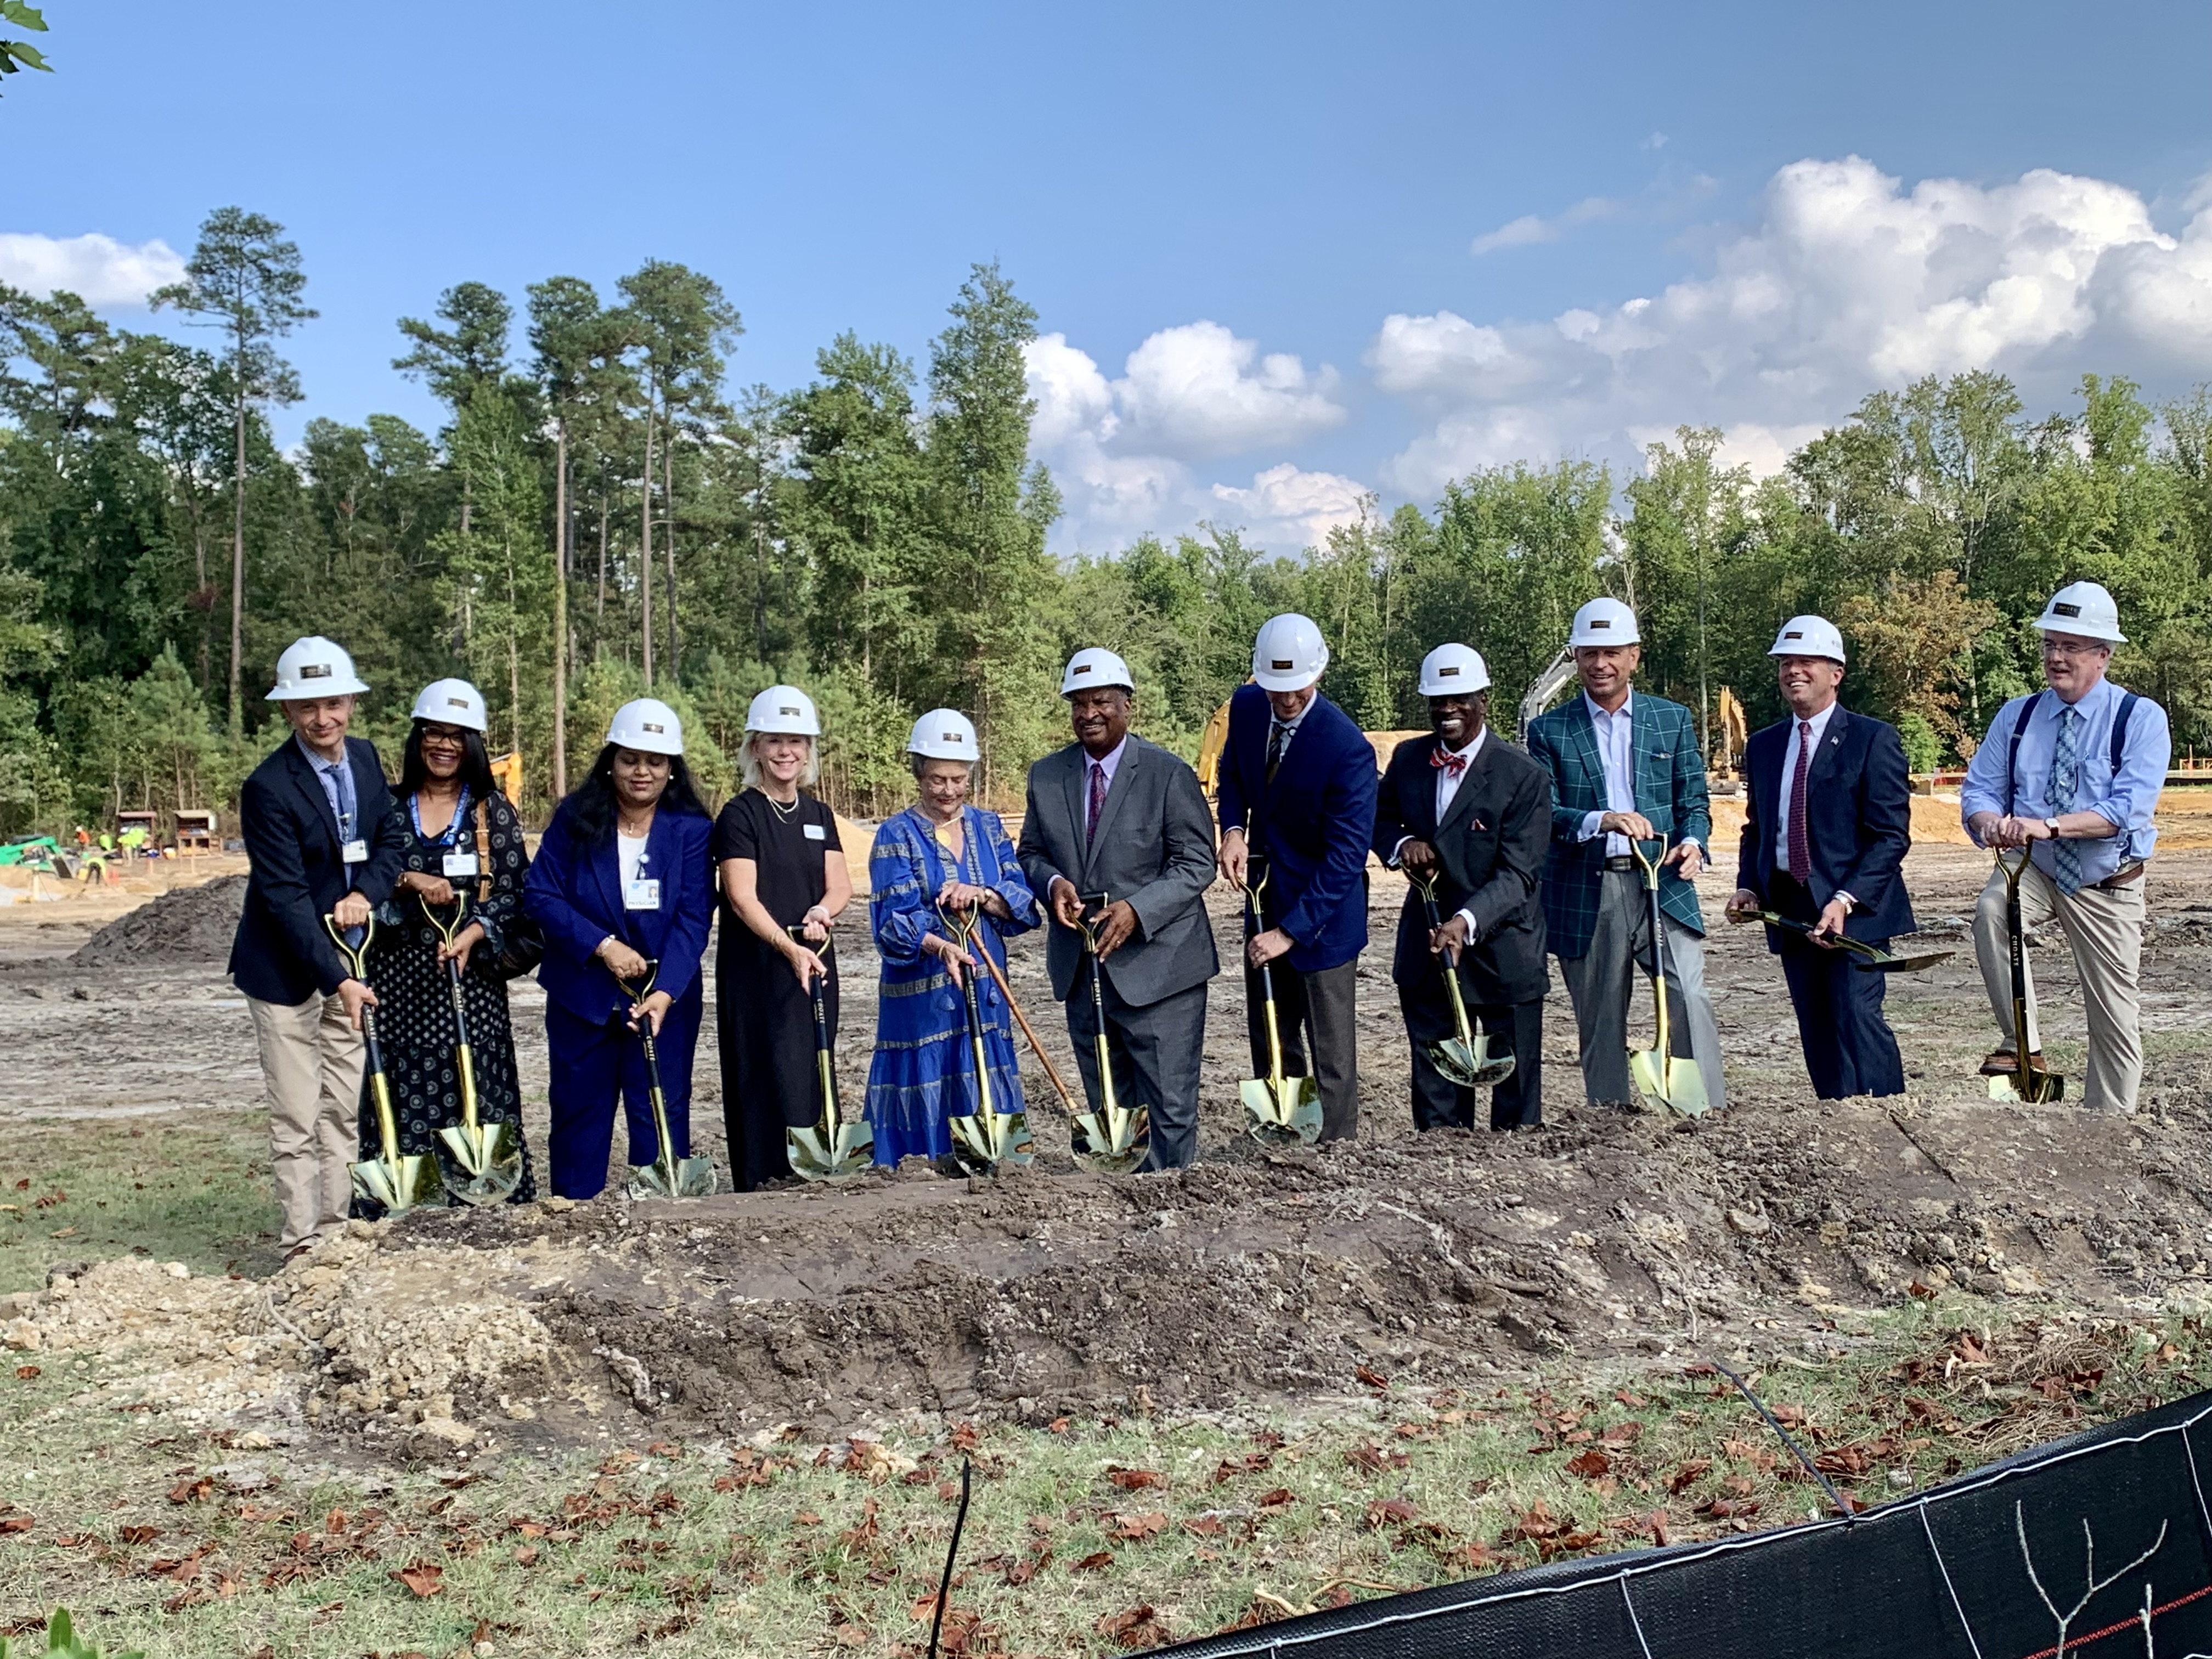 Cape Fear Valley/Harnett Health Breaks Ground, Further Invests in Harnett County’s Growth